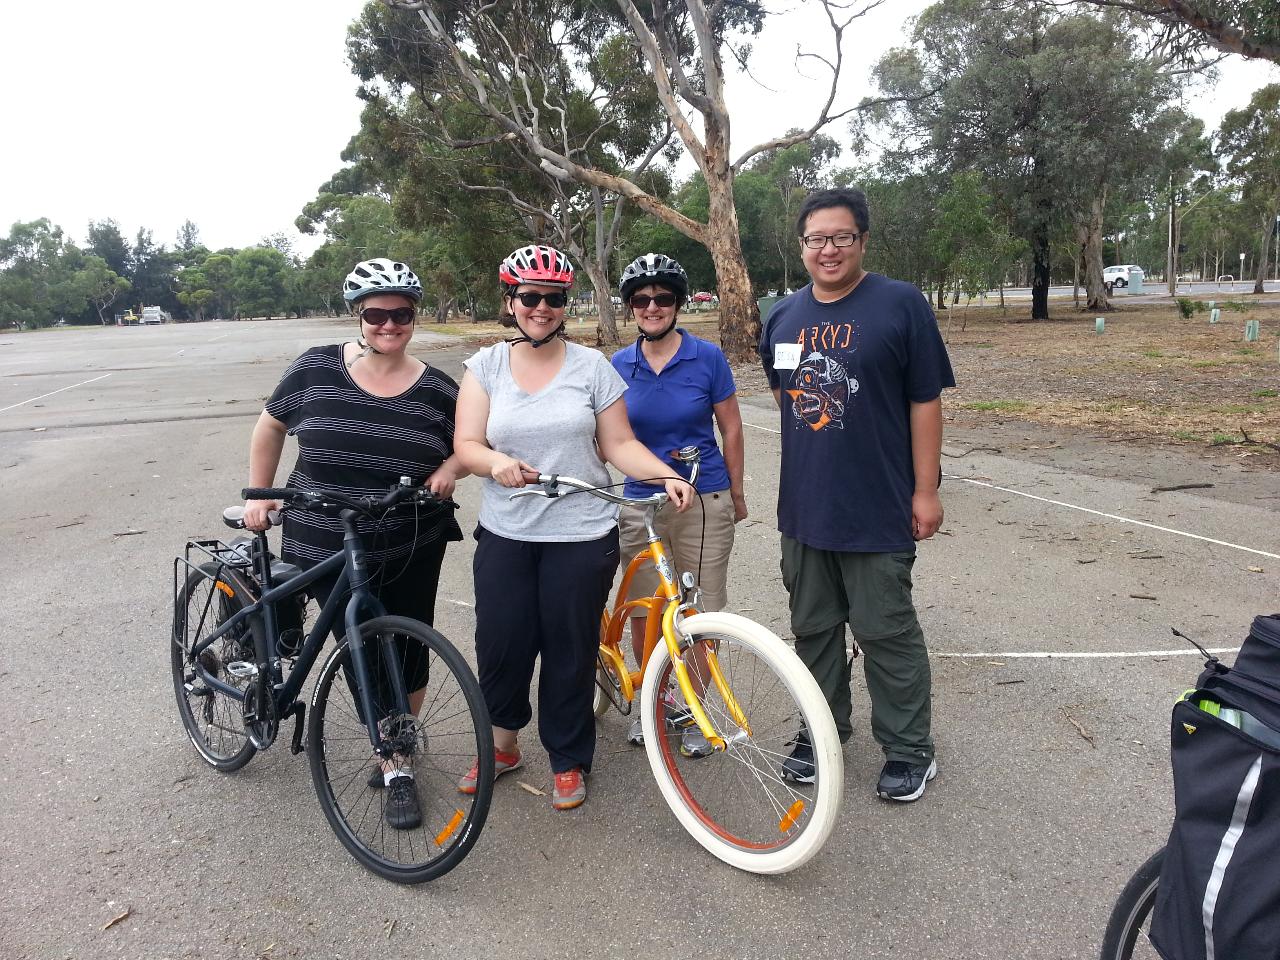 City of Norwood Payneham & St Peters- Adult Learn to Ride and/or Back on the Bike Program